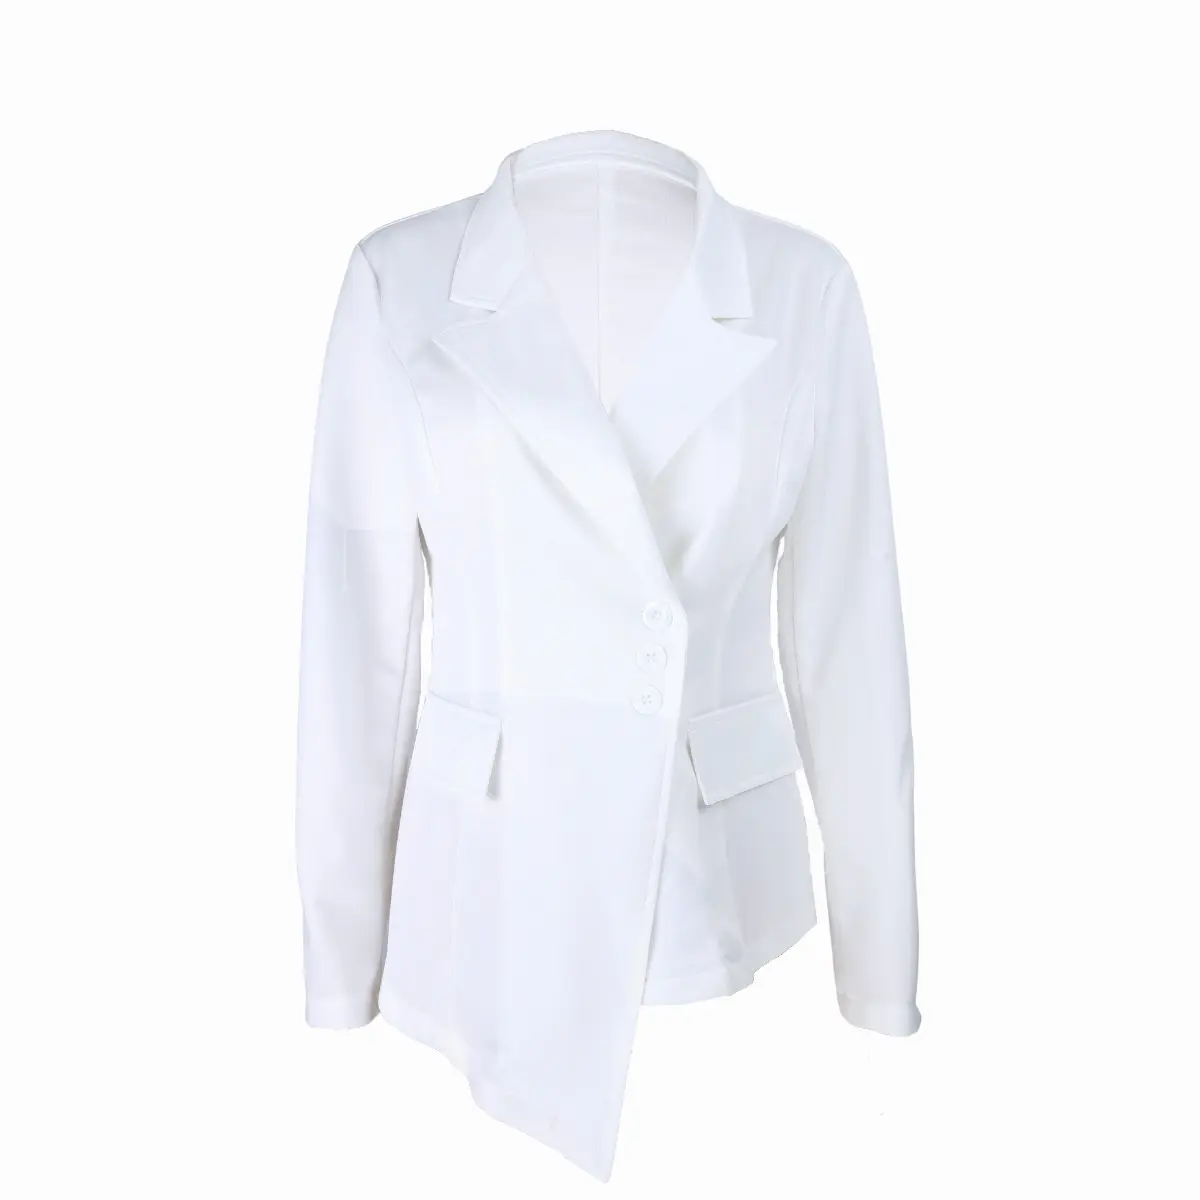 2021 Women Fashion Office Solid Color Long sleeve Abnormal Small Suit Top Business Lady Formal White Blazer For Woman